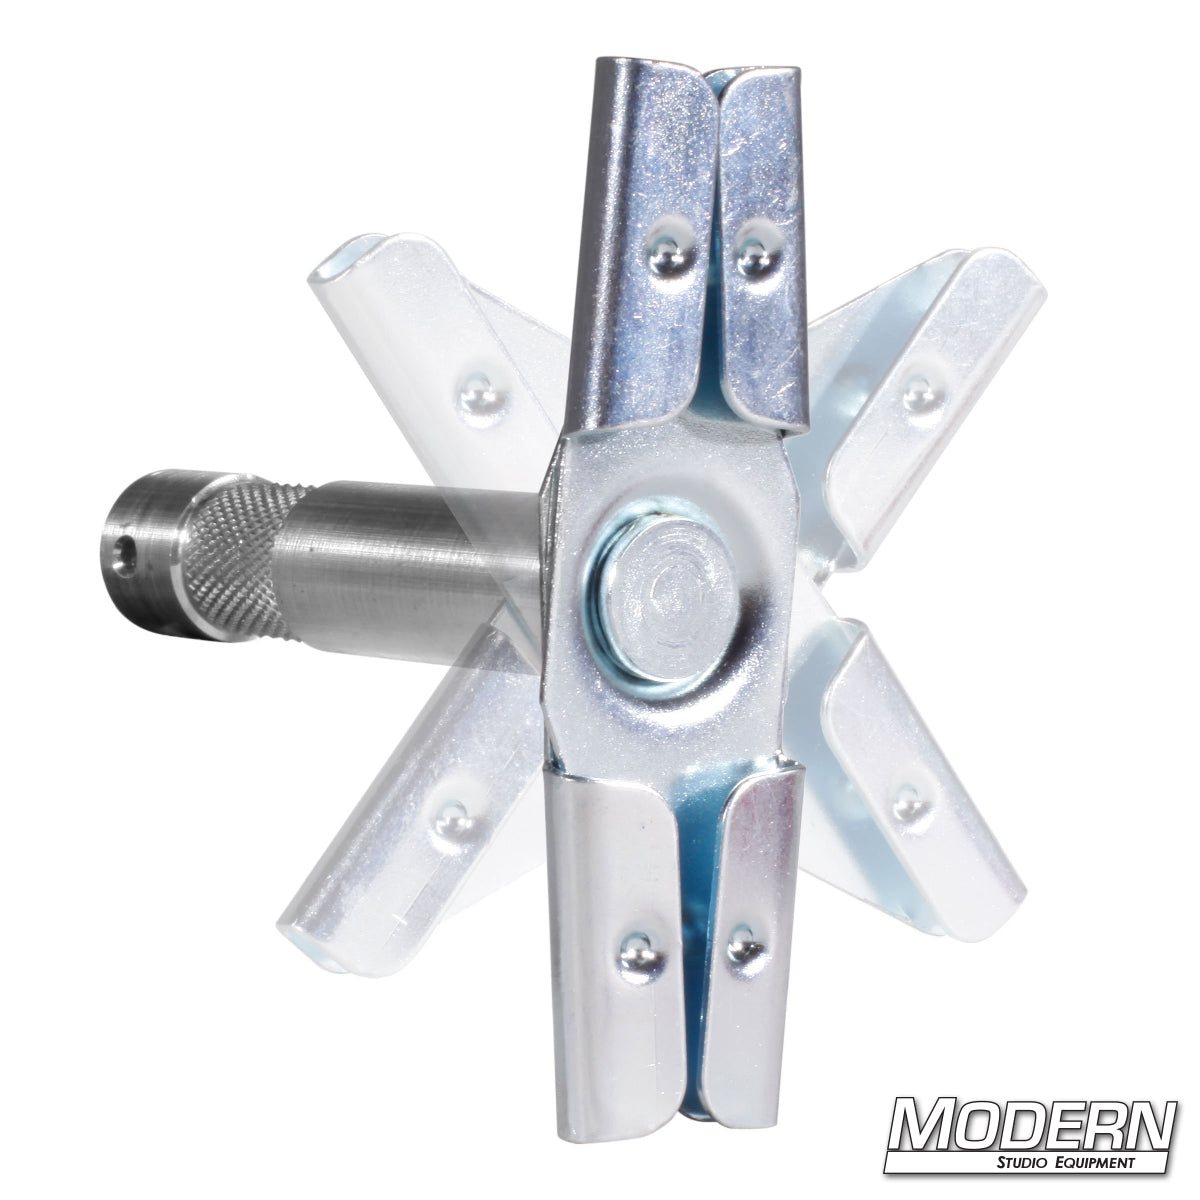 Drop Ceiling Scissor Clamp with 5/8" Pin